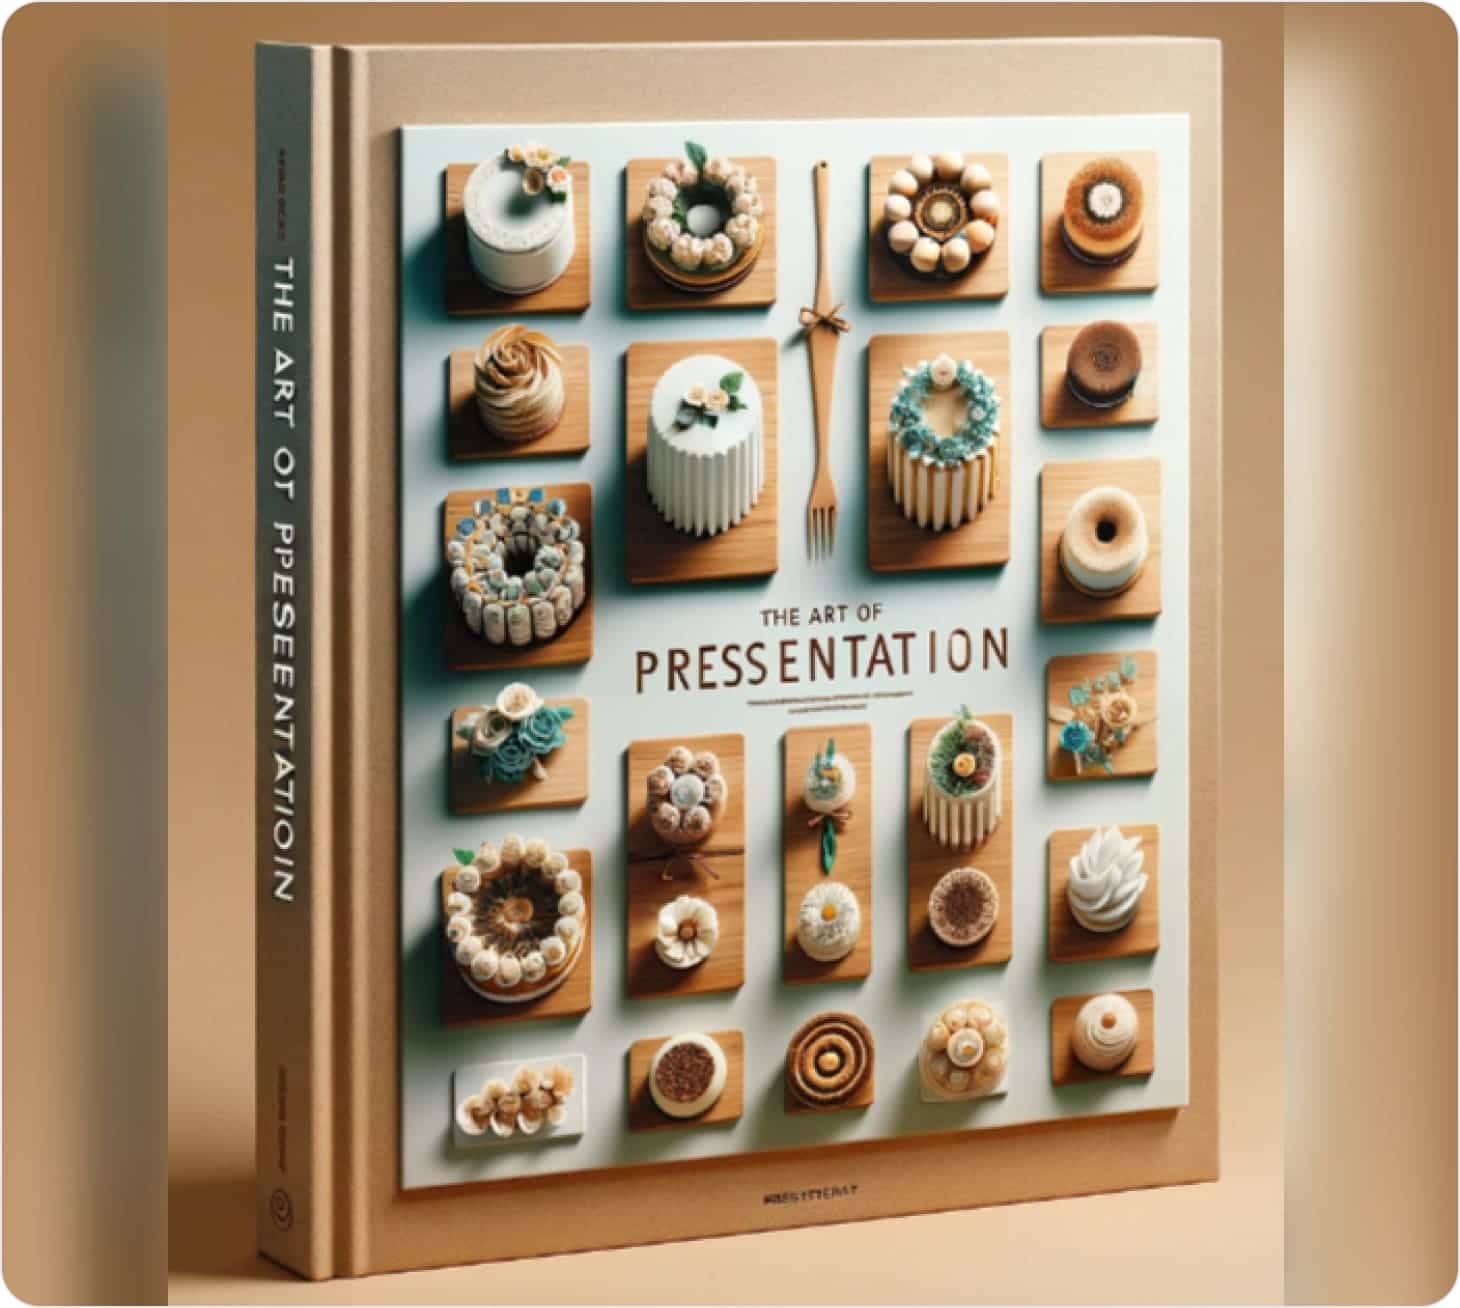 A book about cake presentation